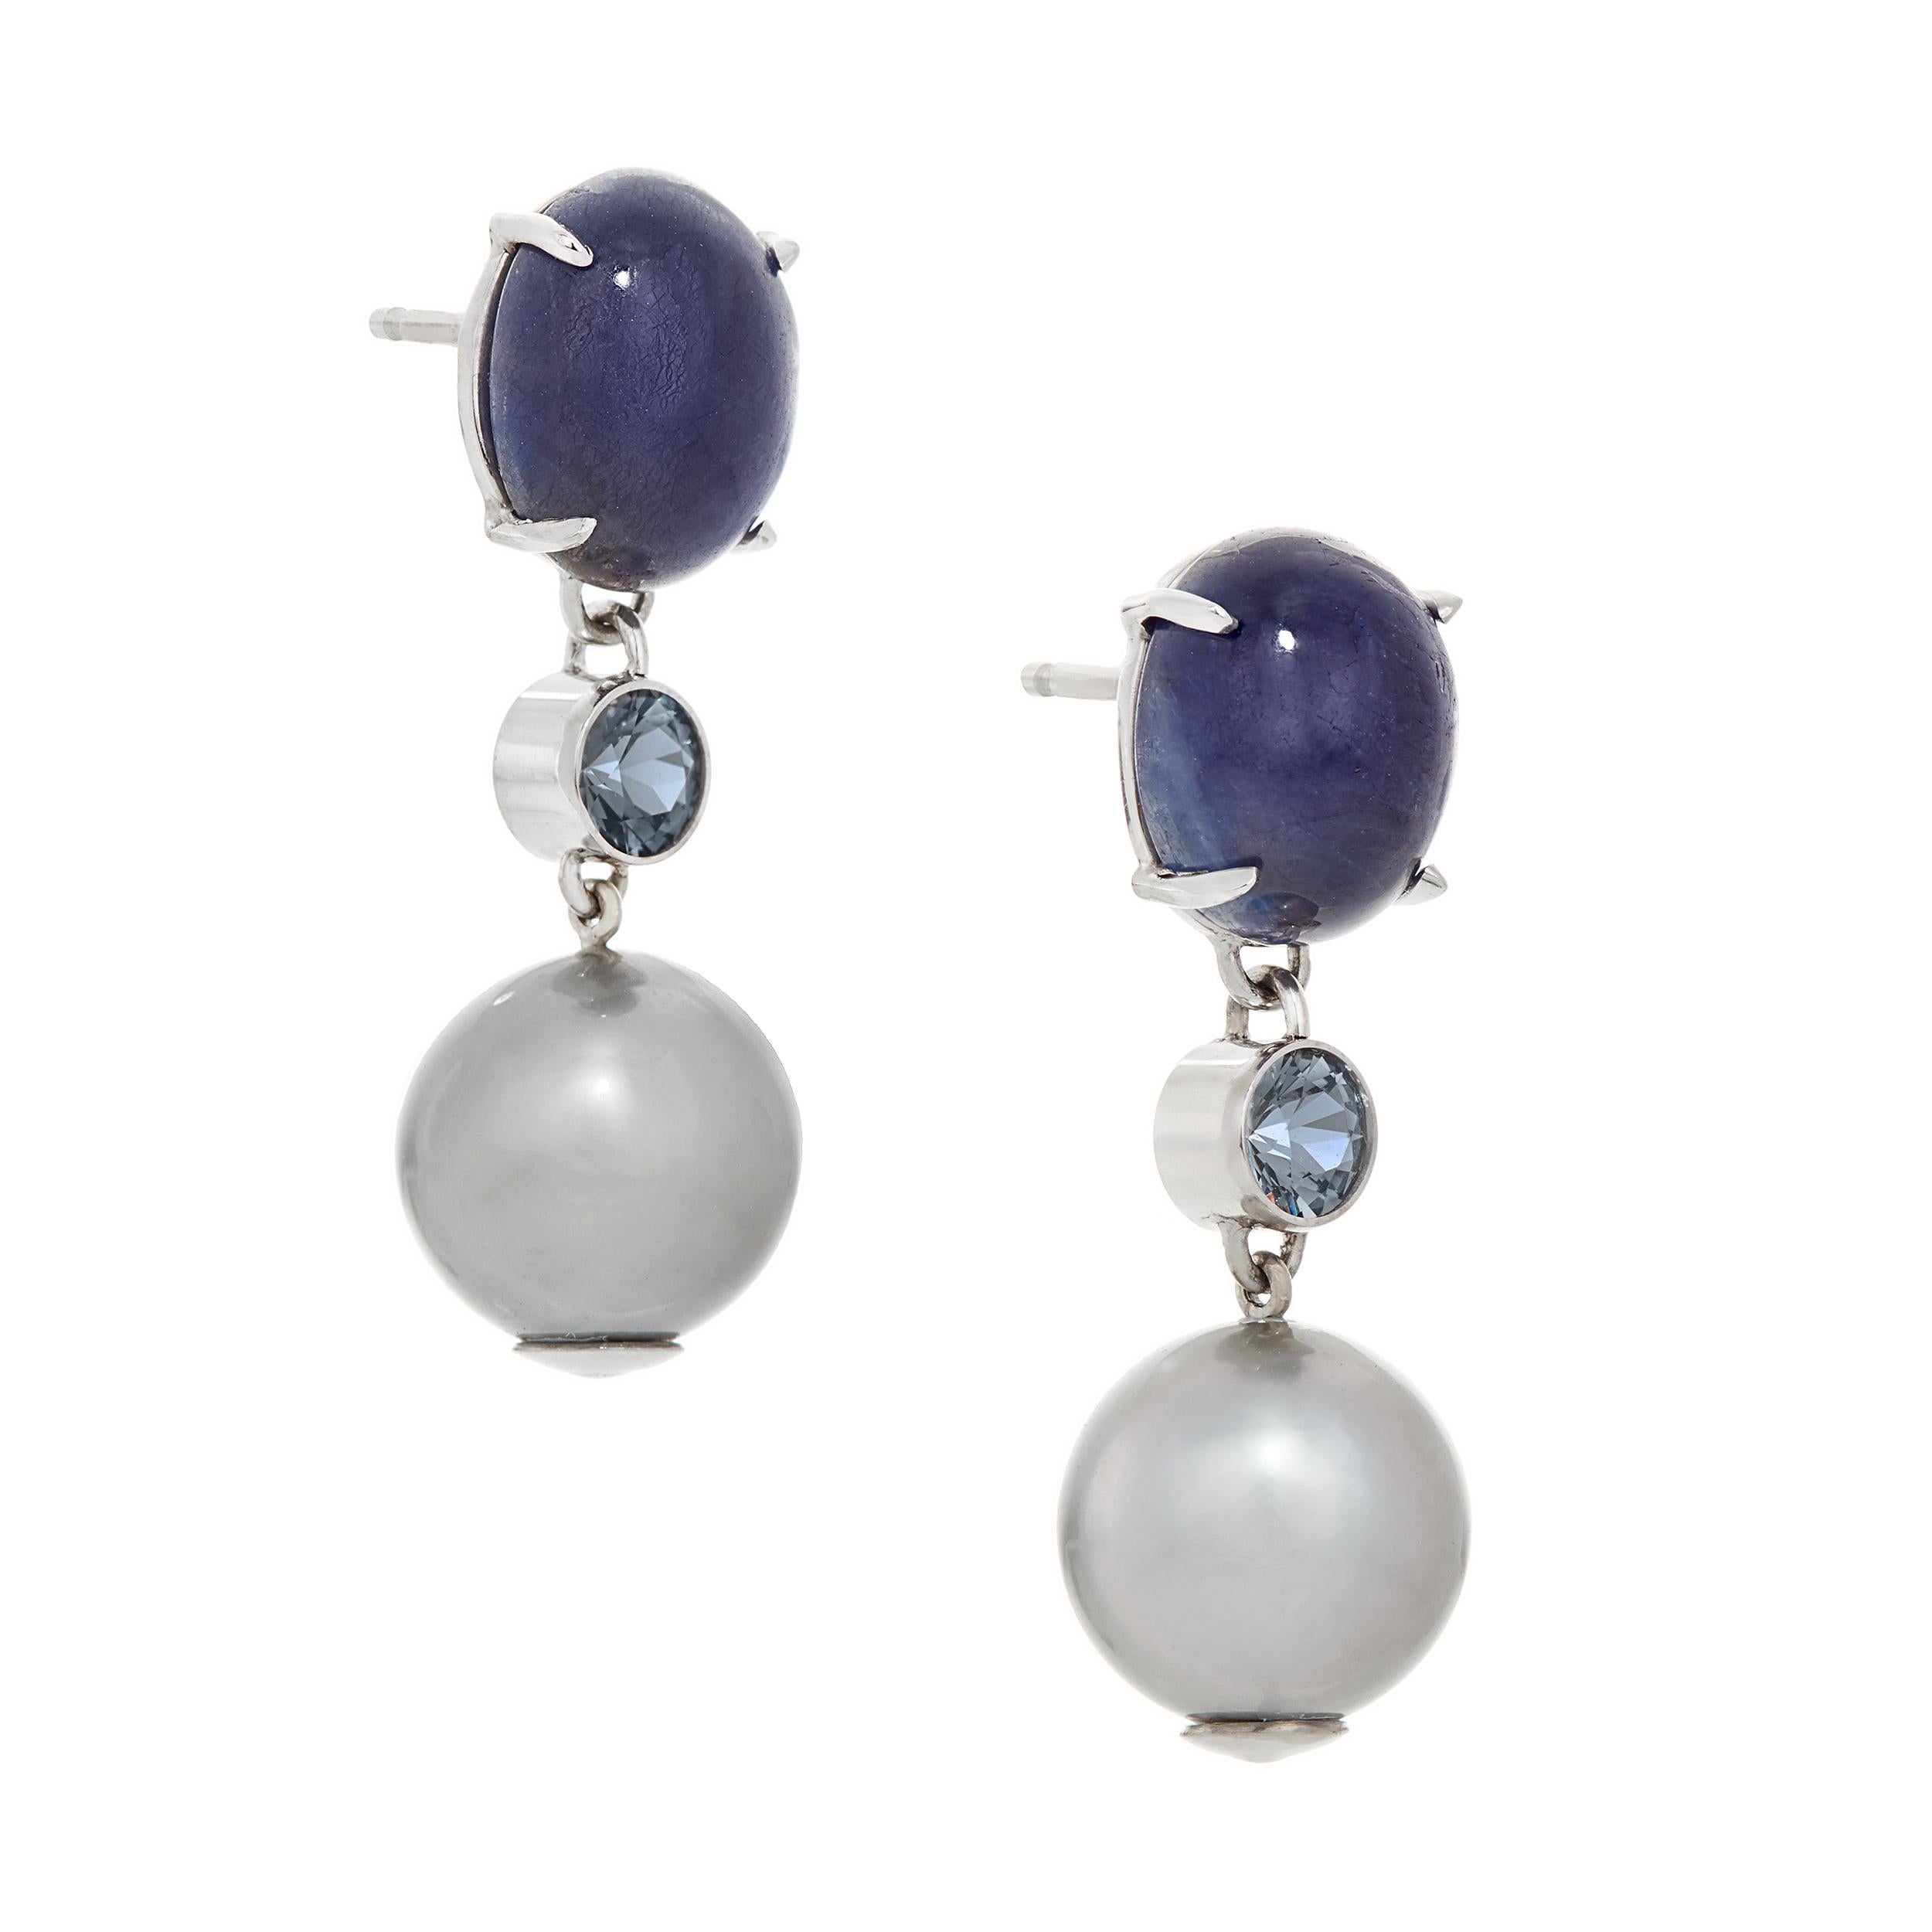 These earrings were designed alongside a coordinating necklace that can be found on a separate listing.  The designer loved the cool tones of these matched Gray Tahitian Pearls complimented by Blue Sapphires and Lavender Spinel.

Gemstone Detail
2